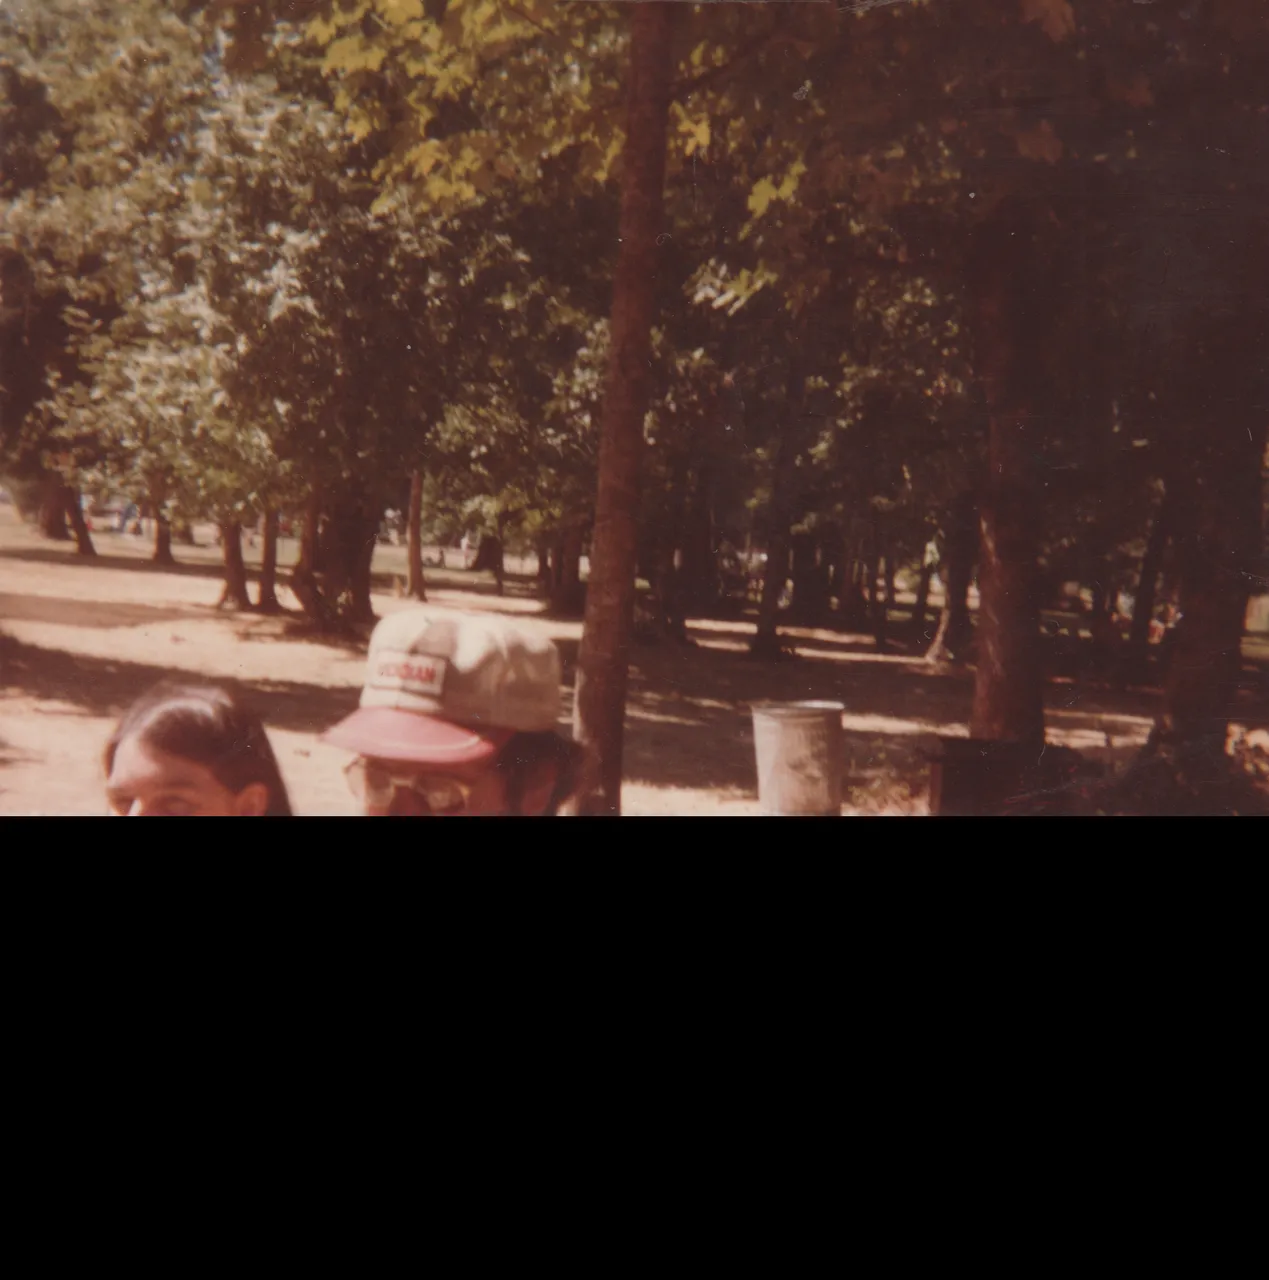 1980-08-22 - Friday - Jim, Karen, Ann Pickell, outside, picnic, park, could be camping, but not sure exactly where or what-2.png